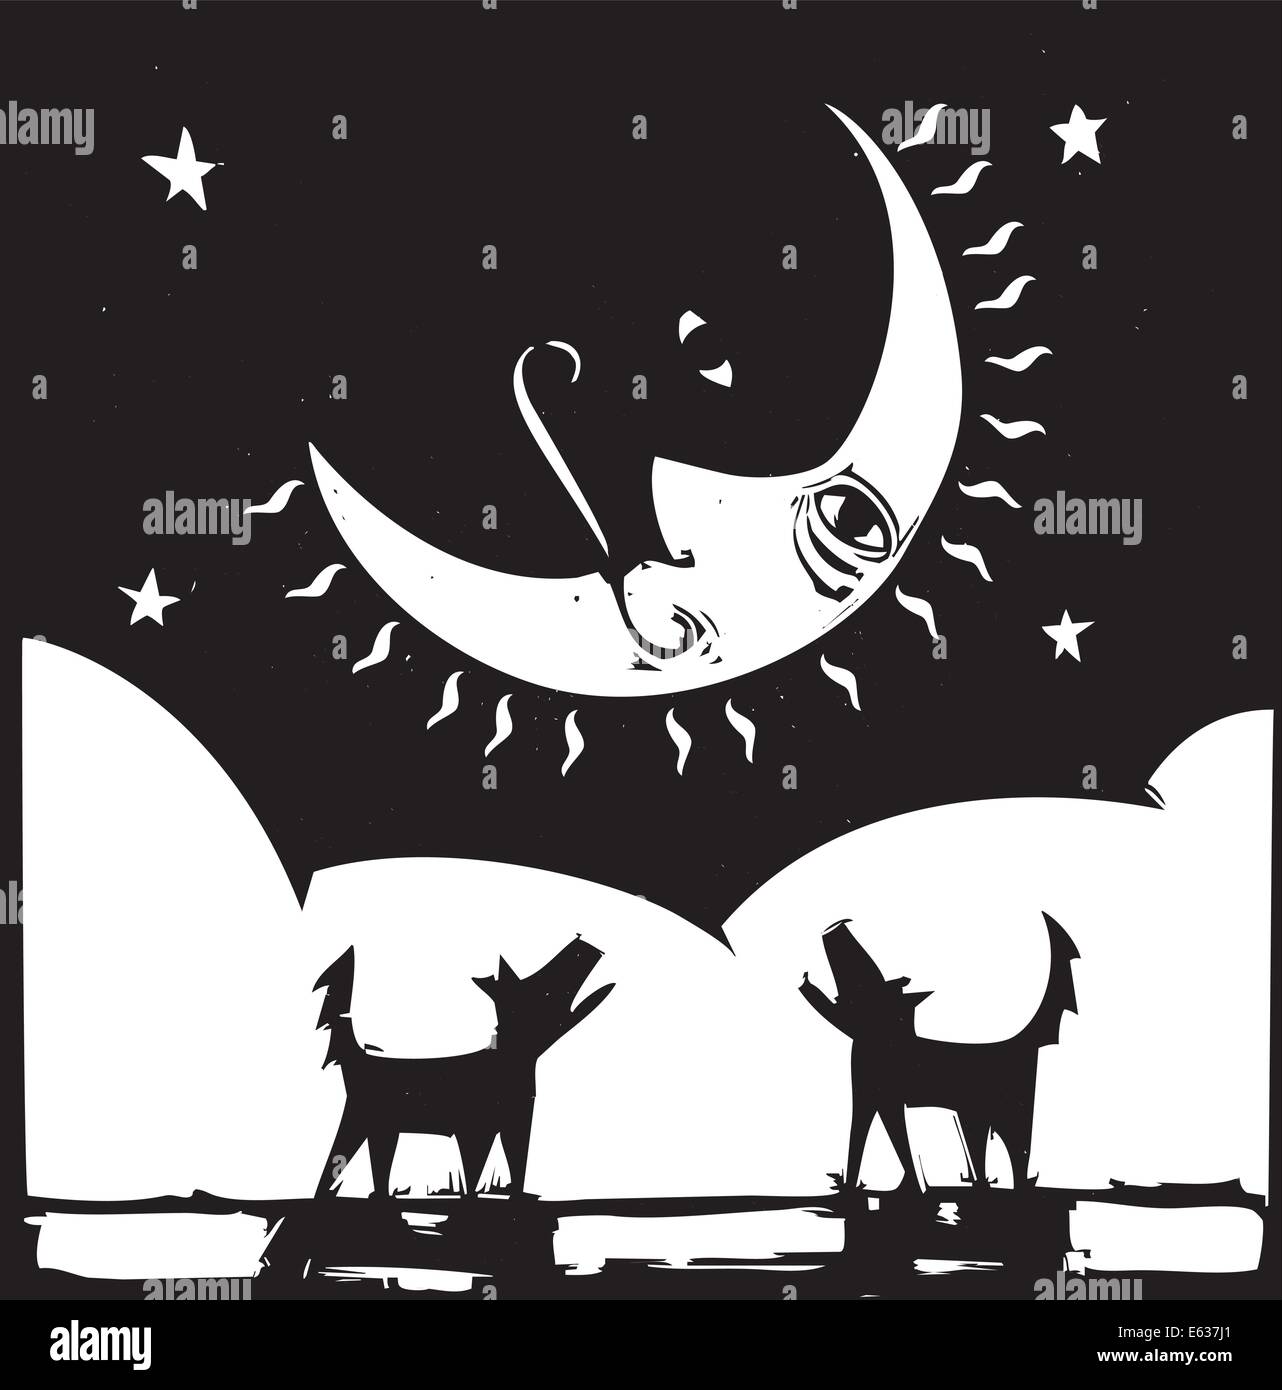 Two lonely dogs howling at a crescent moon with a face. Stock Vector